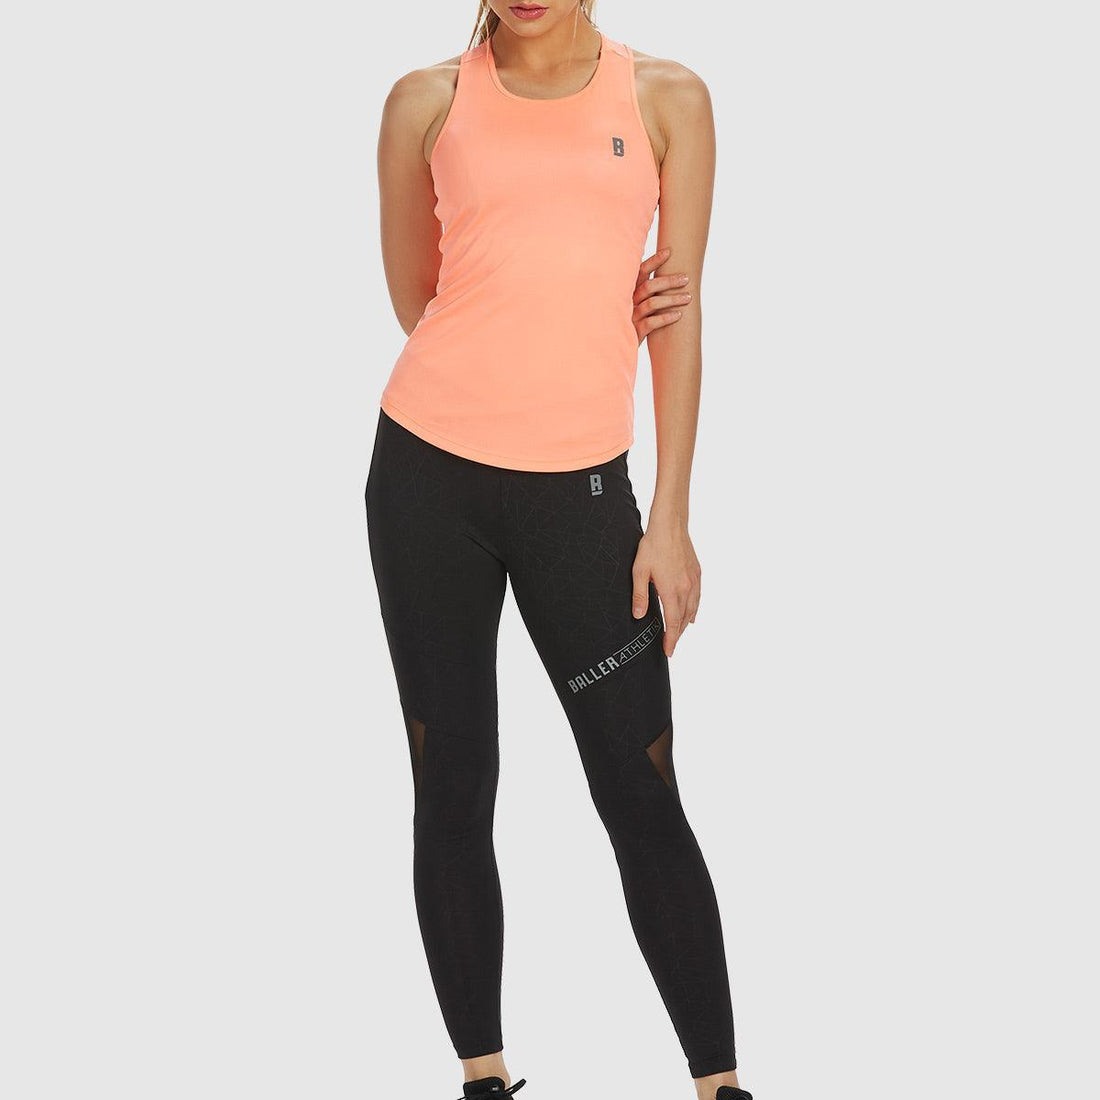 BOMB BAE Enhance Sports Tank Top for Women's and Girls Athletic Fit